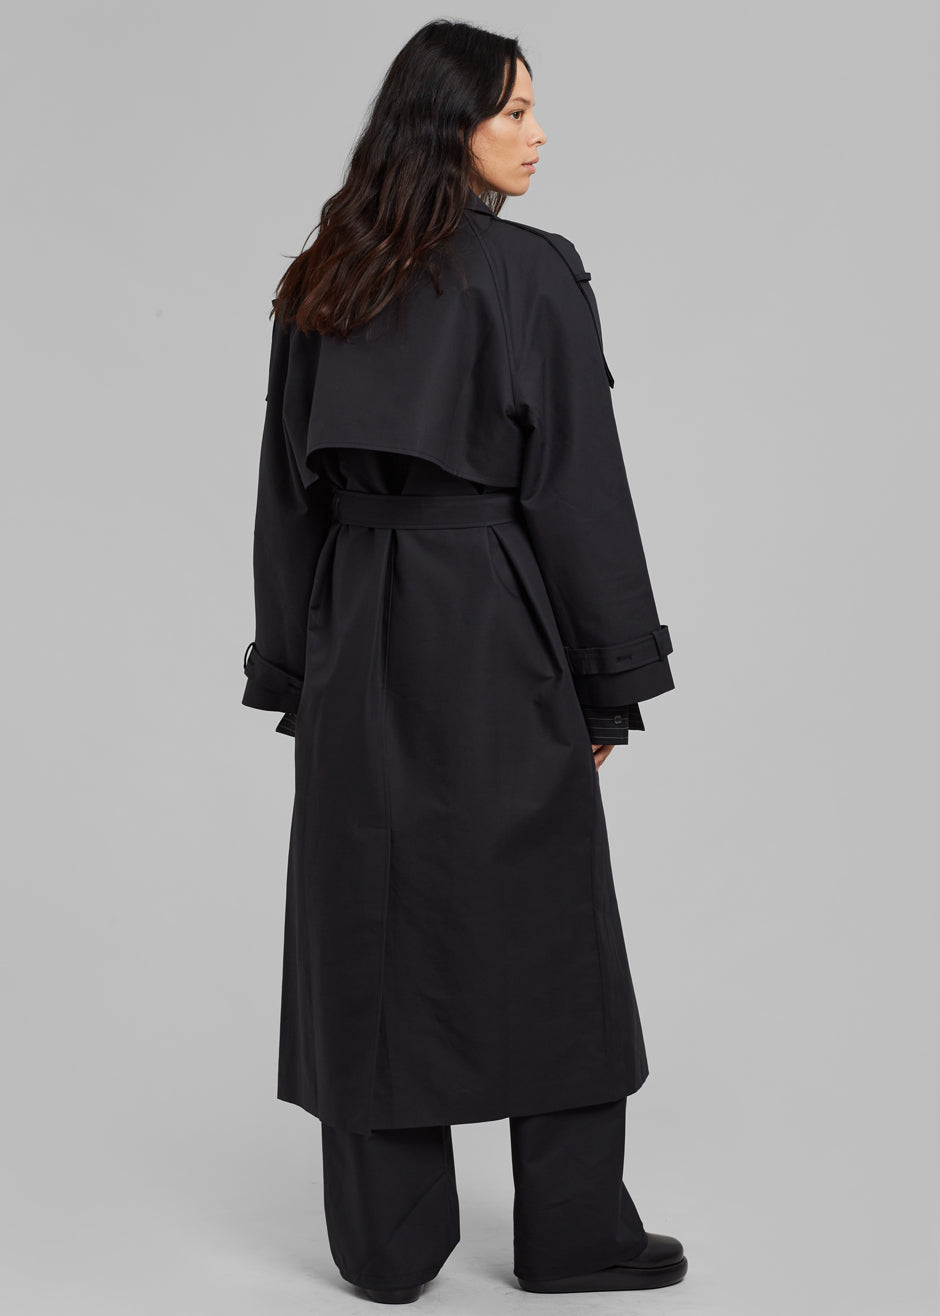 Suzanne Trench Coat - Black - 6